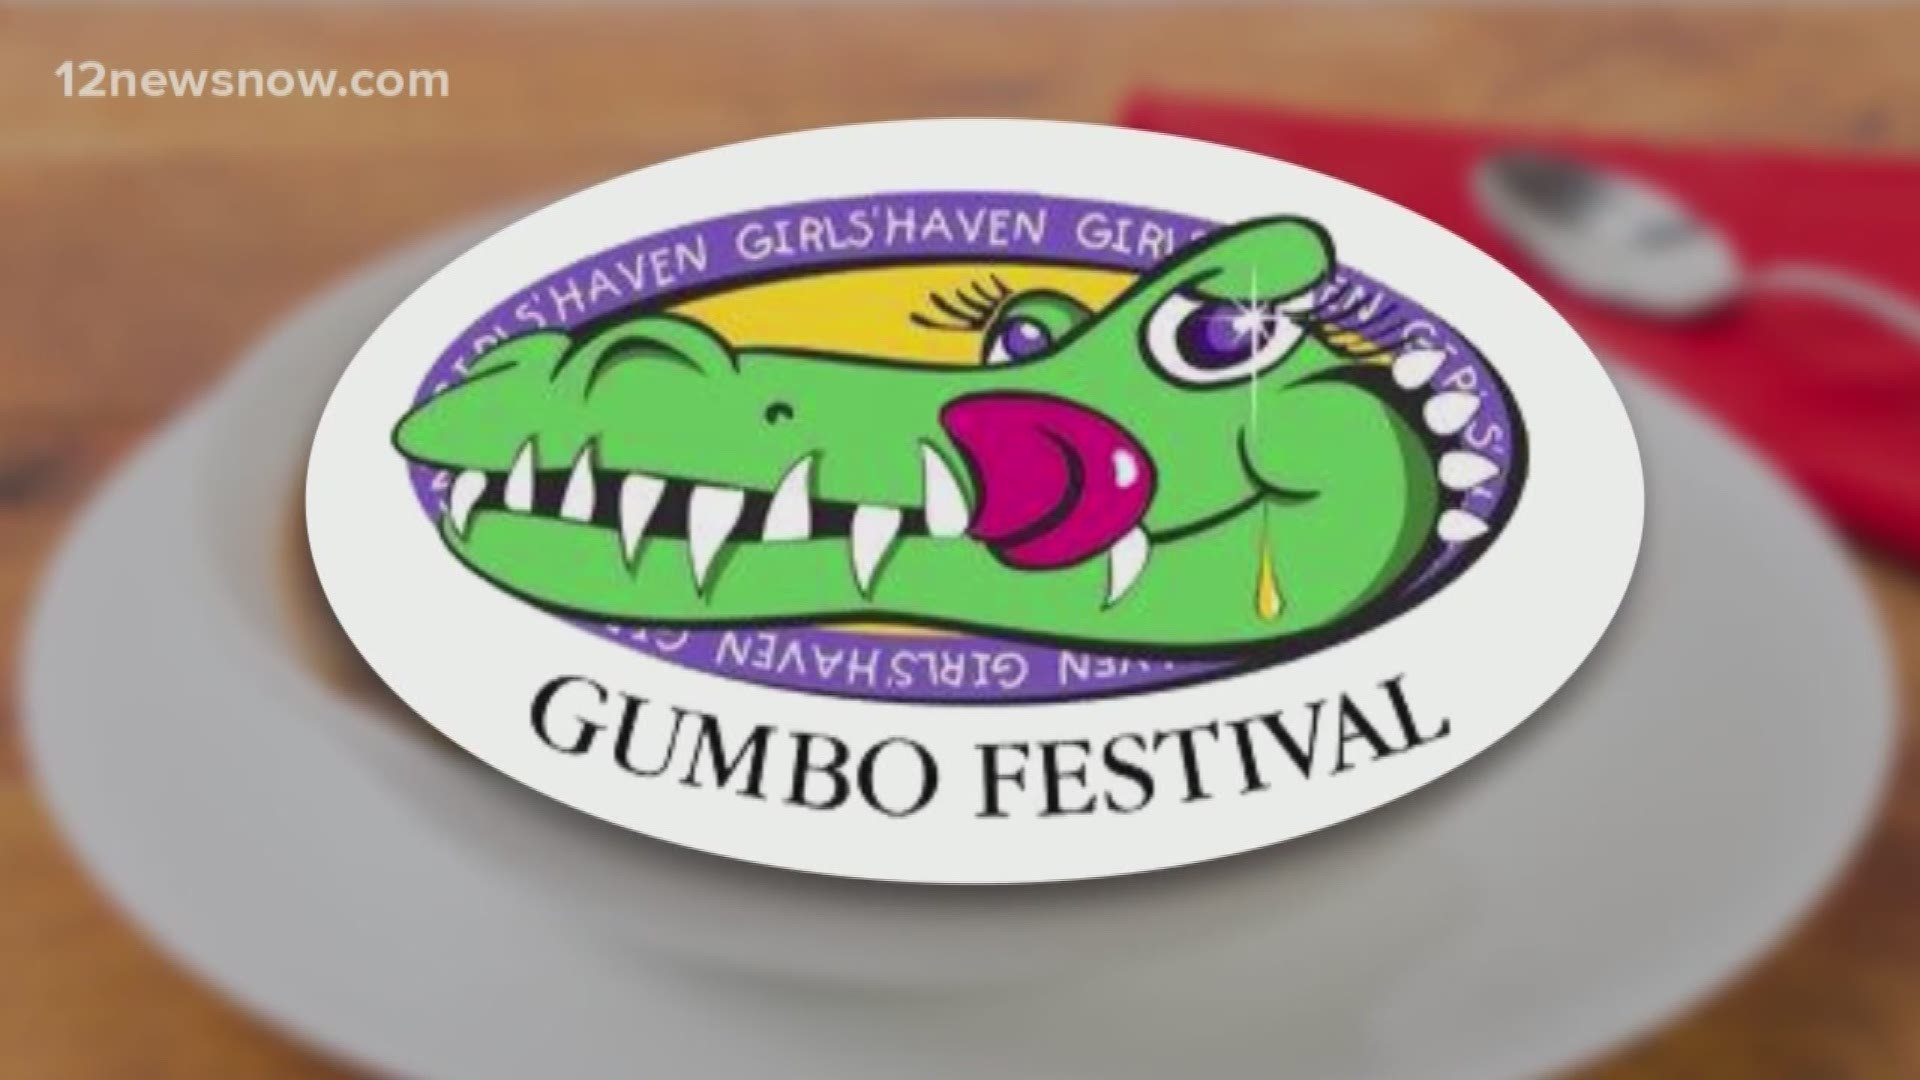 Girls' Haven is having their 25th annual Girls' Haven Gumbo Festival on October 19, 2019 in Beaumont, TX.